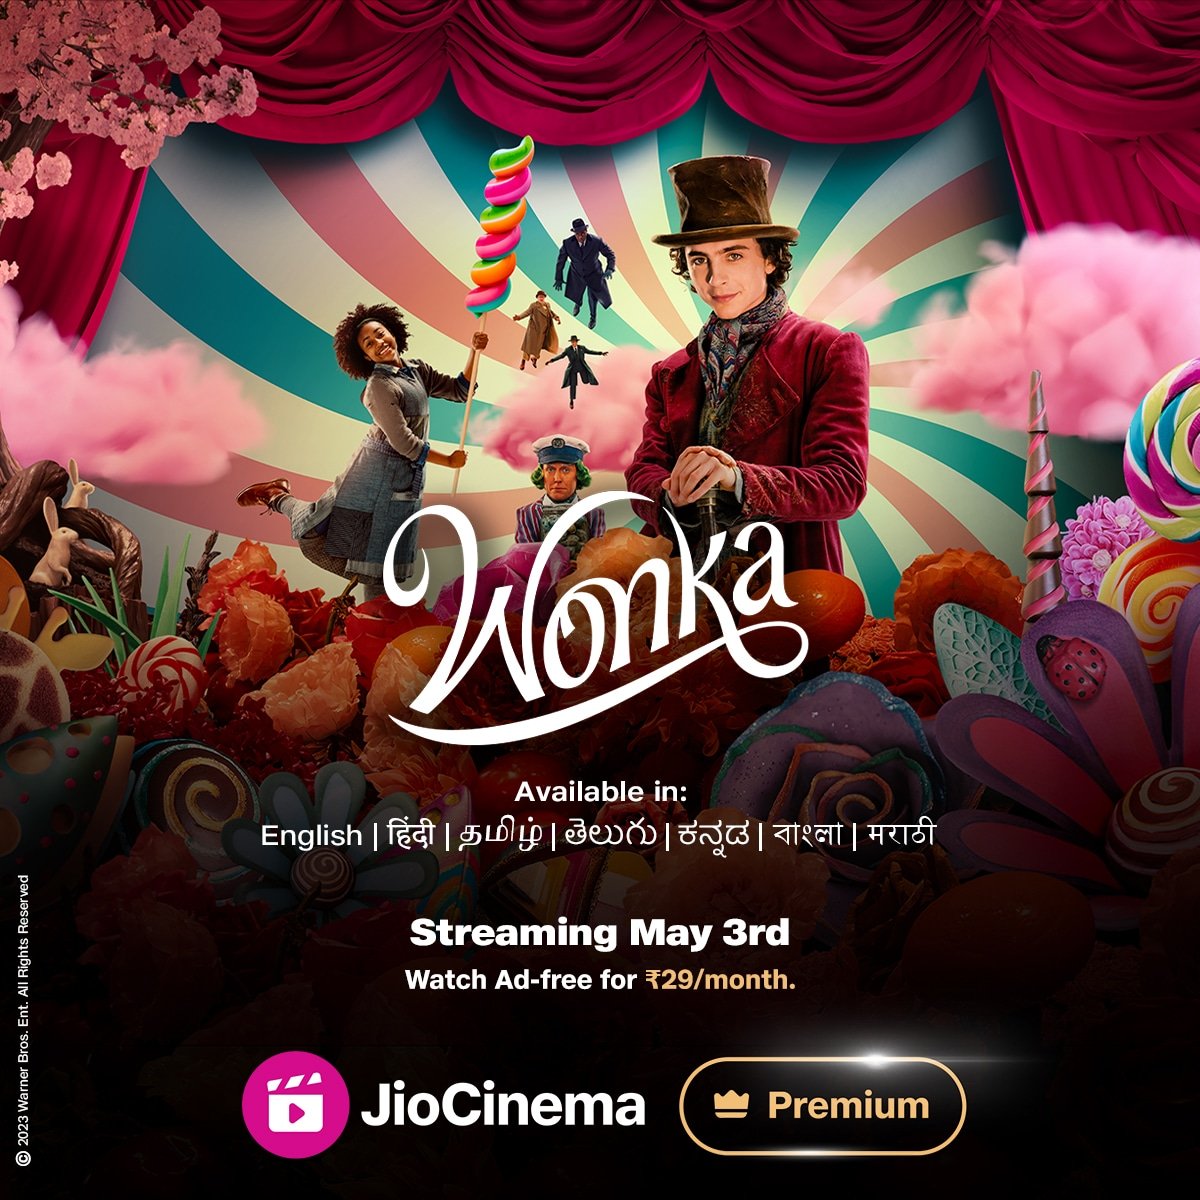 Every good thing in this world started with a dream 🍬✨ #Wonka streaming on #JioCinema May 3rd onwards. Available in #English, #Hindi, #Tamil, #Telugu, #Kannada, #Bengali, #Marathi.